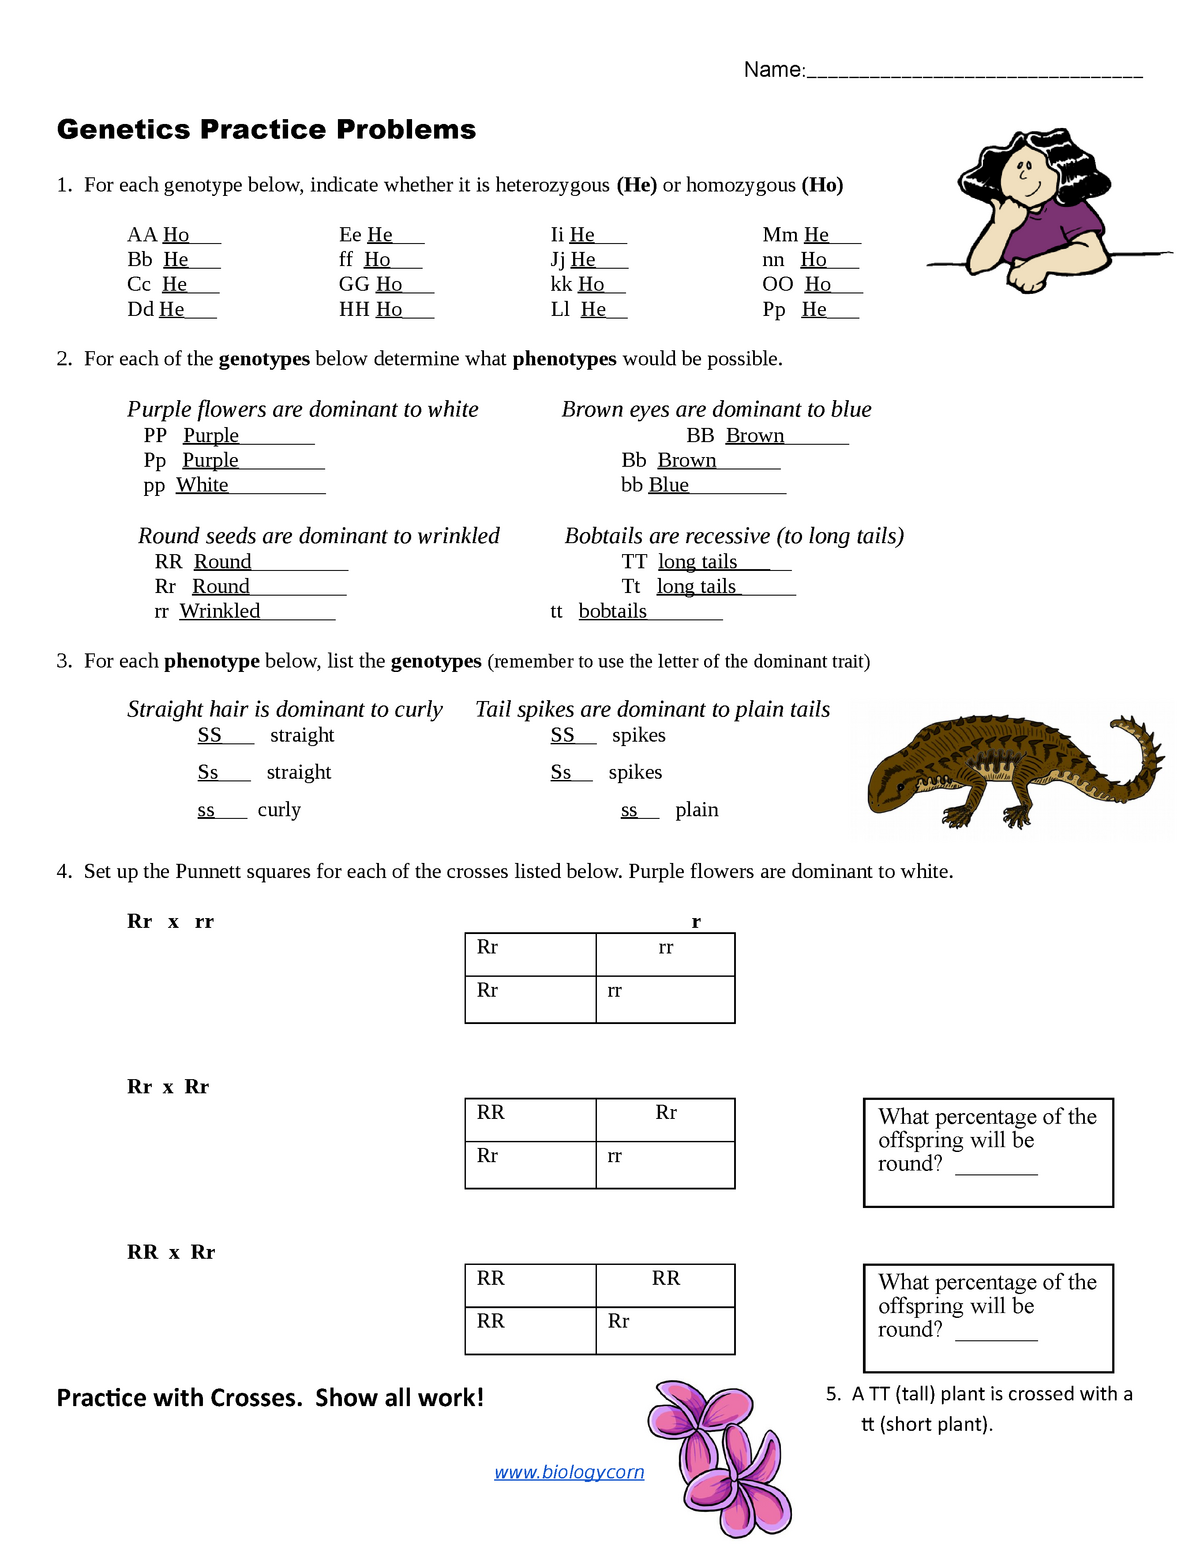 Copy of Practice - simple genetics - ENGL 21 - Science Fiction With Regard To Genetics Practice Problems Worksheet Answers